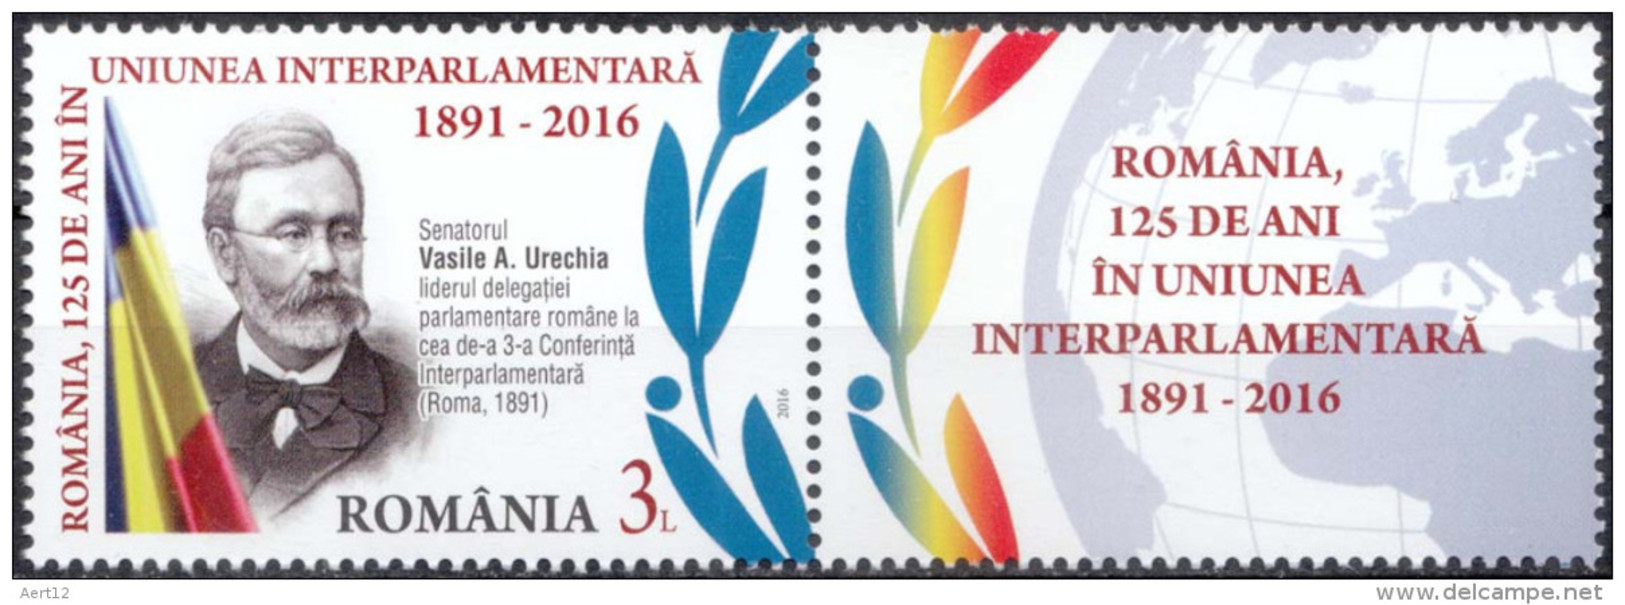 ROMANIA, 2016, 125 YEARS IN THE IPU, International Organizations, Famous People, Stamp Vith Label, MNH (**), LPMP 2101 - Unused Stamps